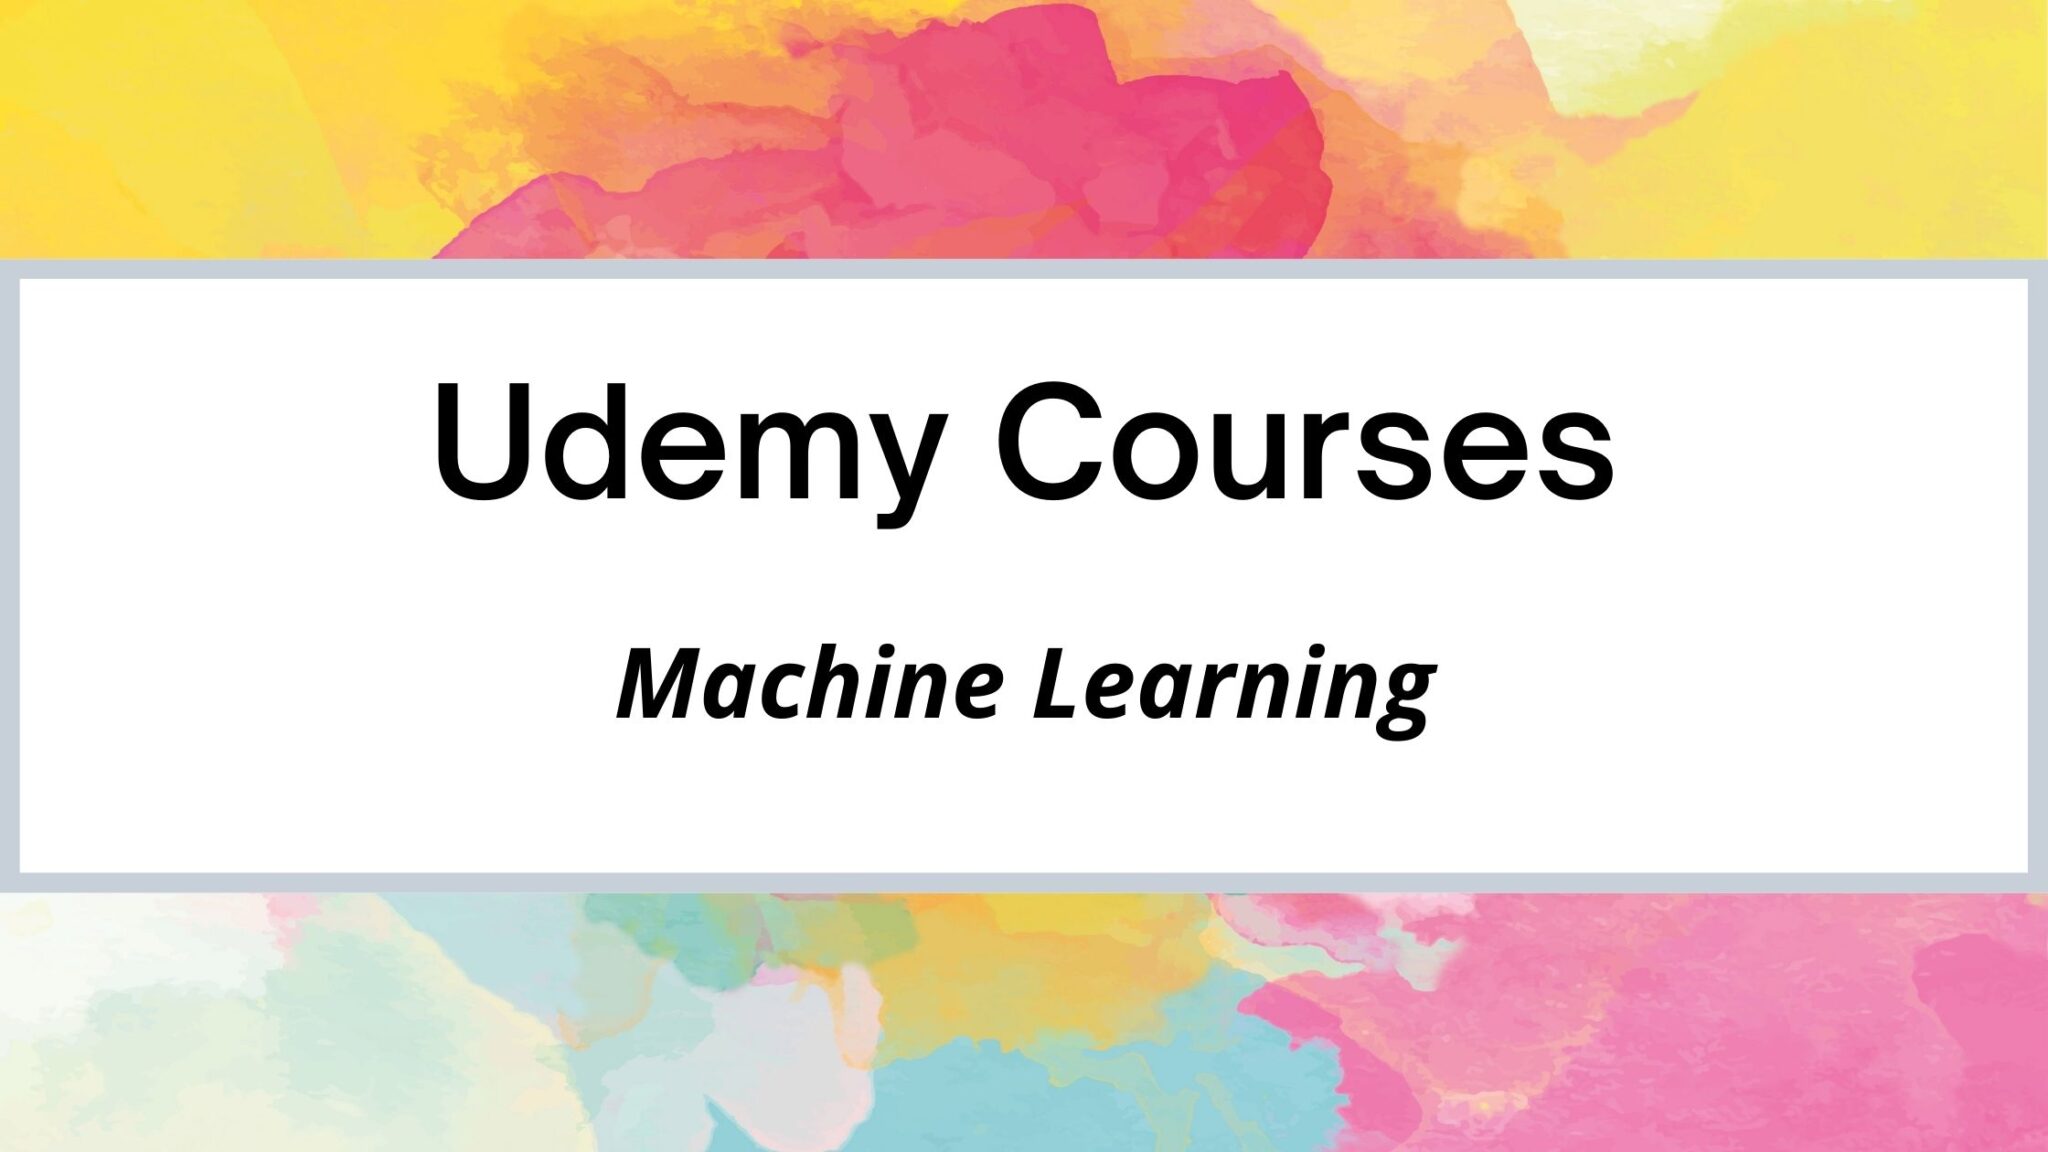 10 Best Udemy Courses for Machine Learning You Must Know in 2022